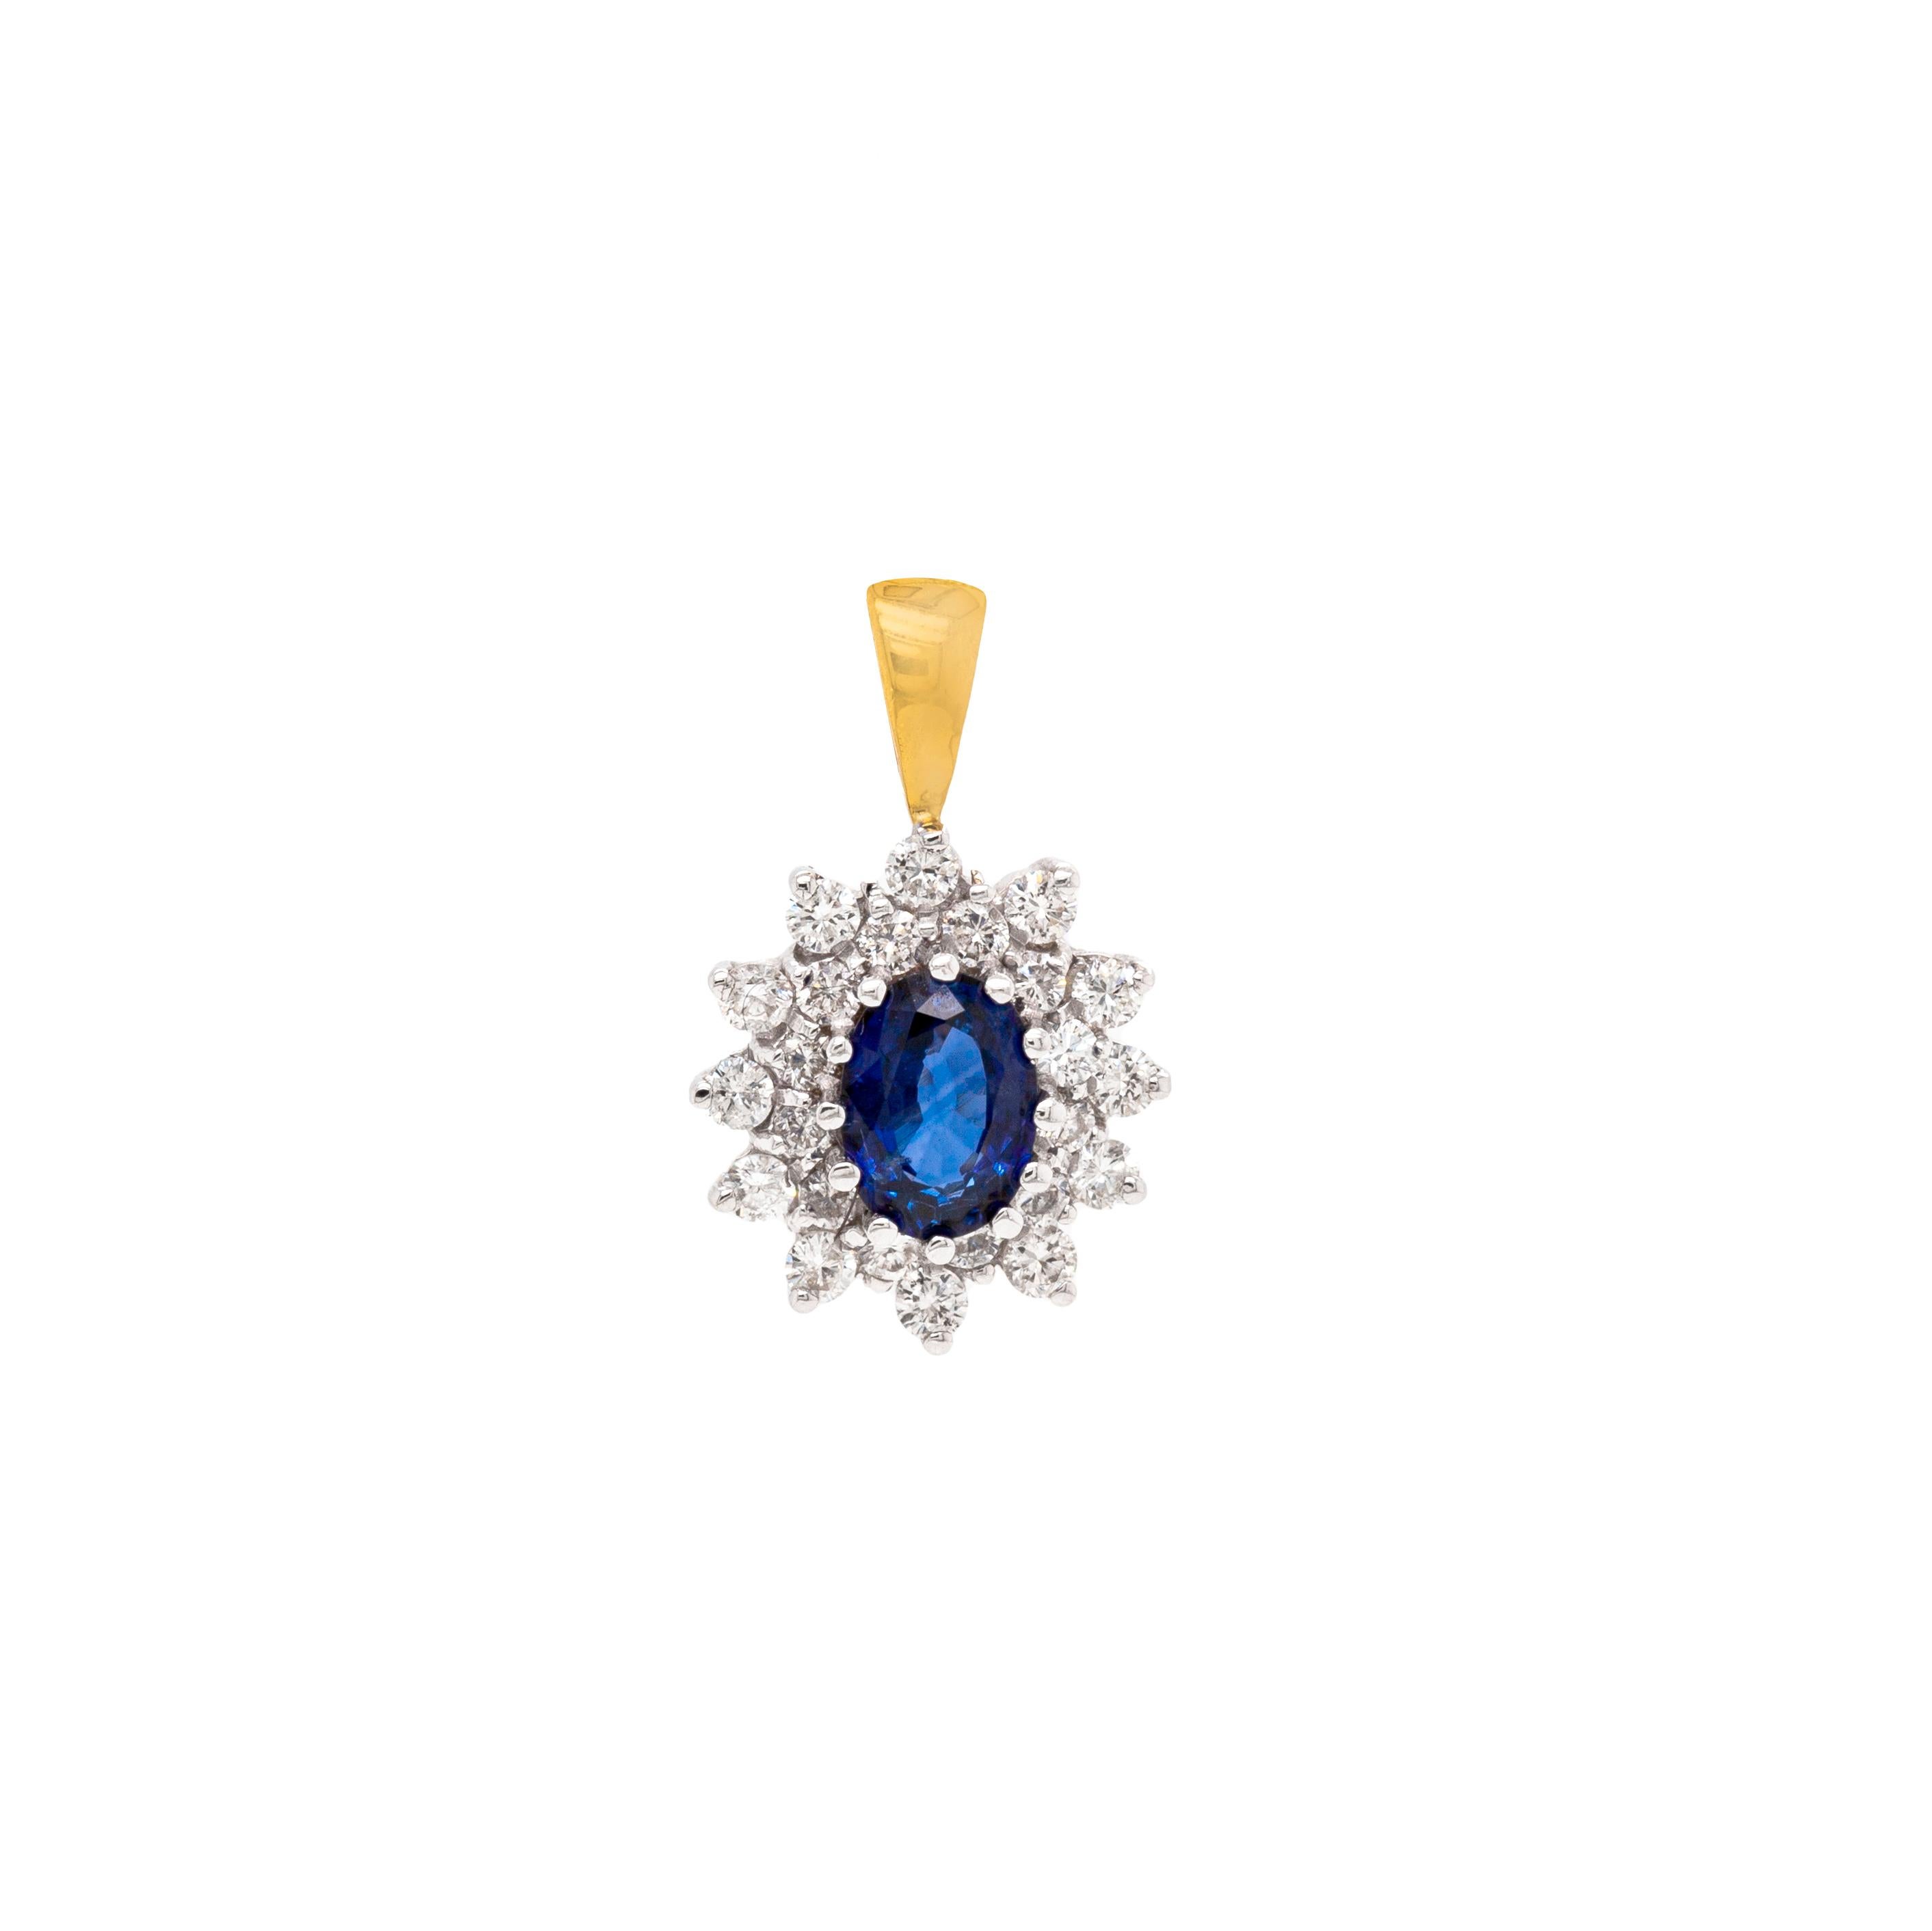 This gorgeous cluster pendant is beautifully centred with an oval blue sapphire weighing 0.75ct, mounted in a twelve claw, open back setting. A beautiful contrast to the vivid stone is given by 12 fine quality round brilliant cut diamonds, all